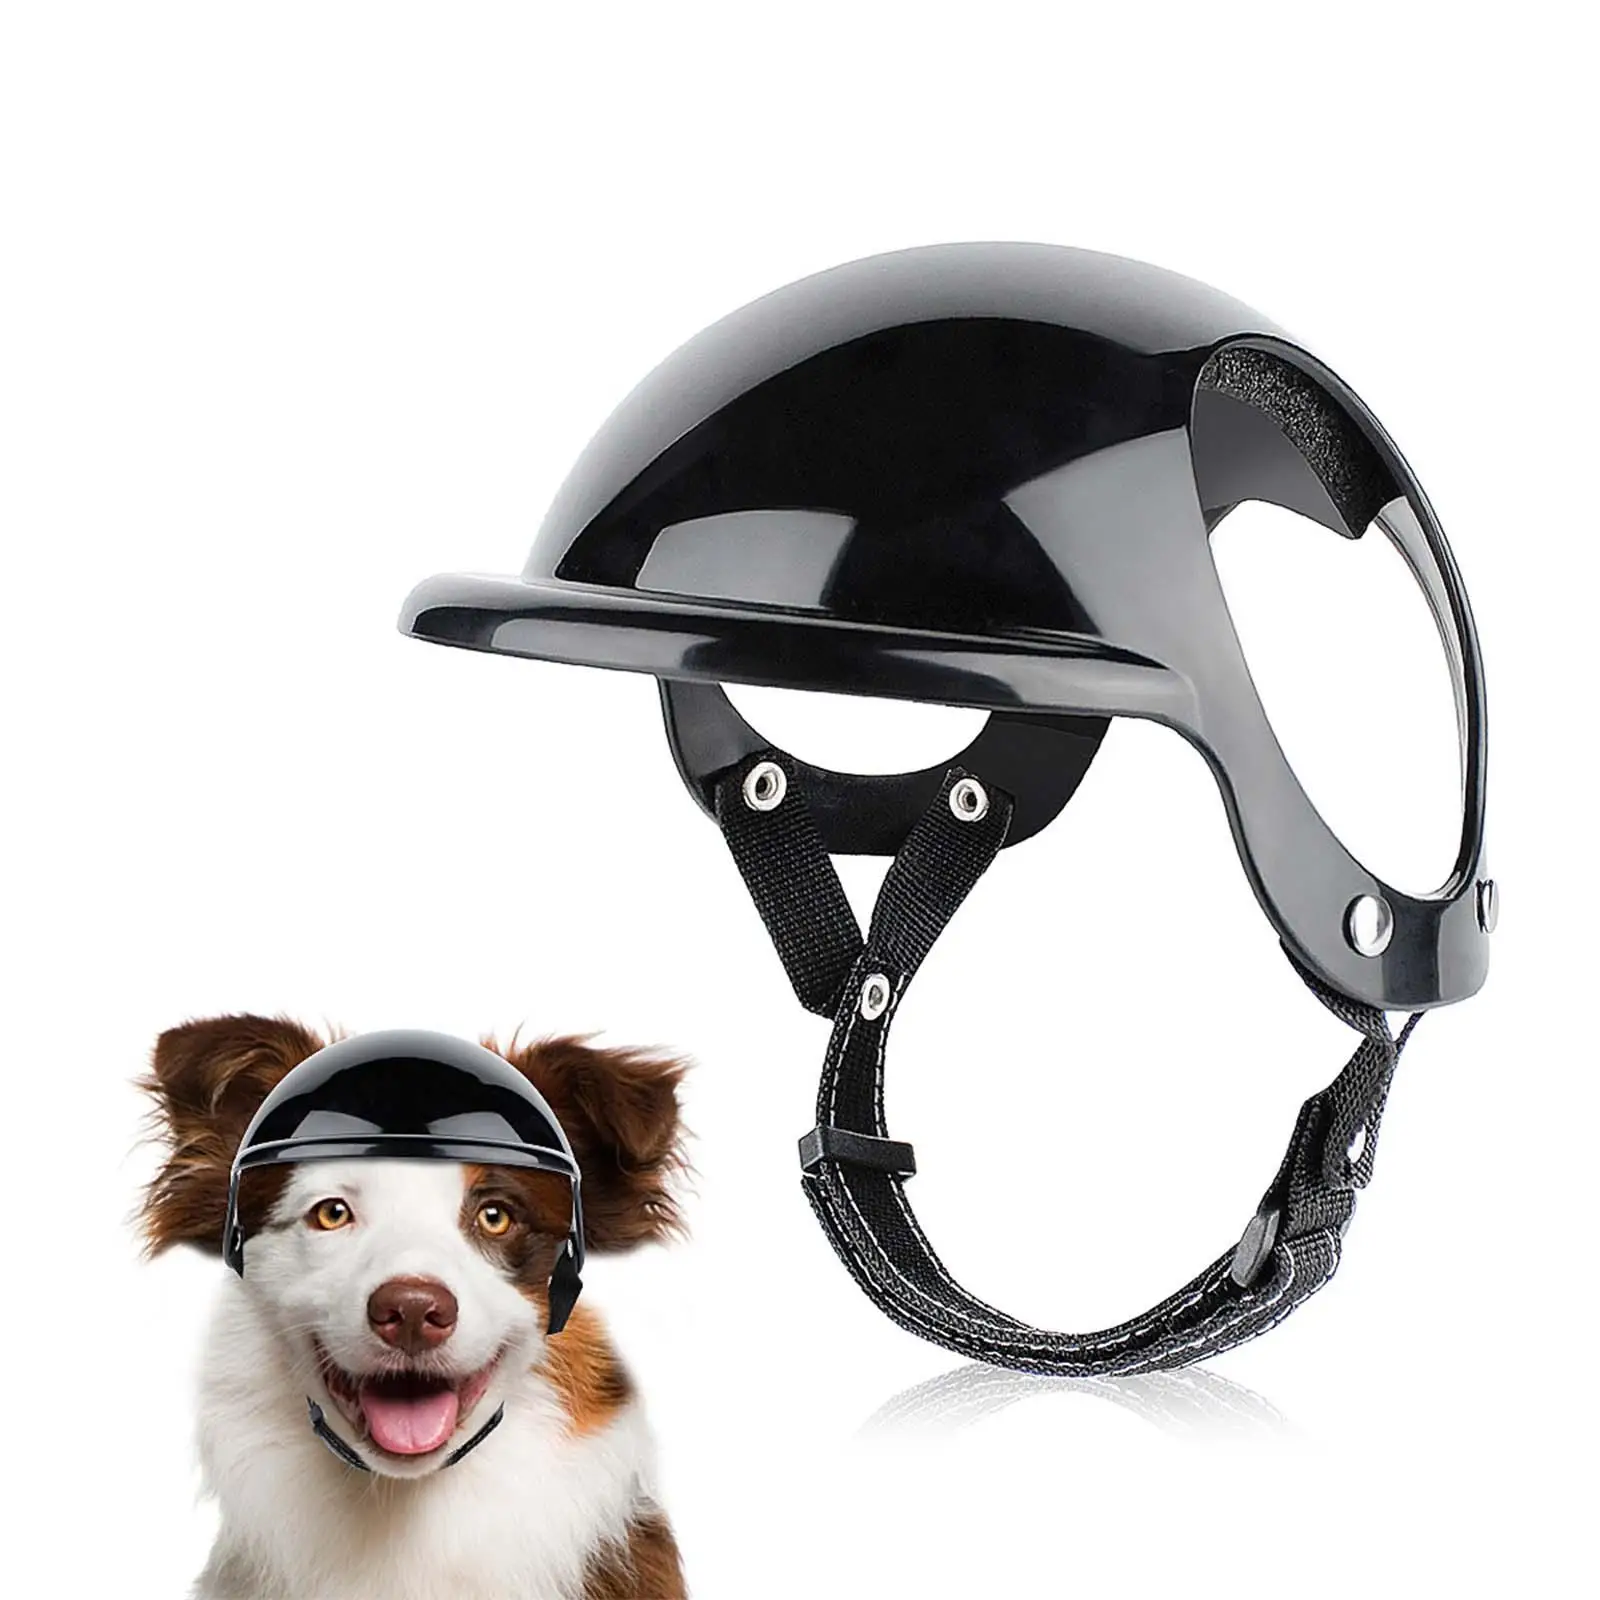 dog Helmet Photo Props Hat Supplies Puppy Party Adjustable Accessories for Motorcycle Cats Walking Riding Small Dogs